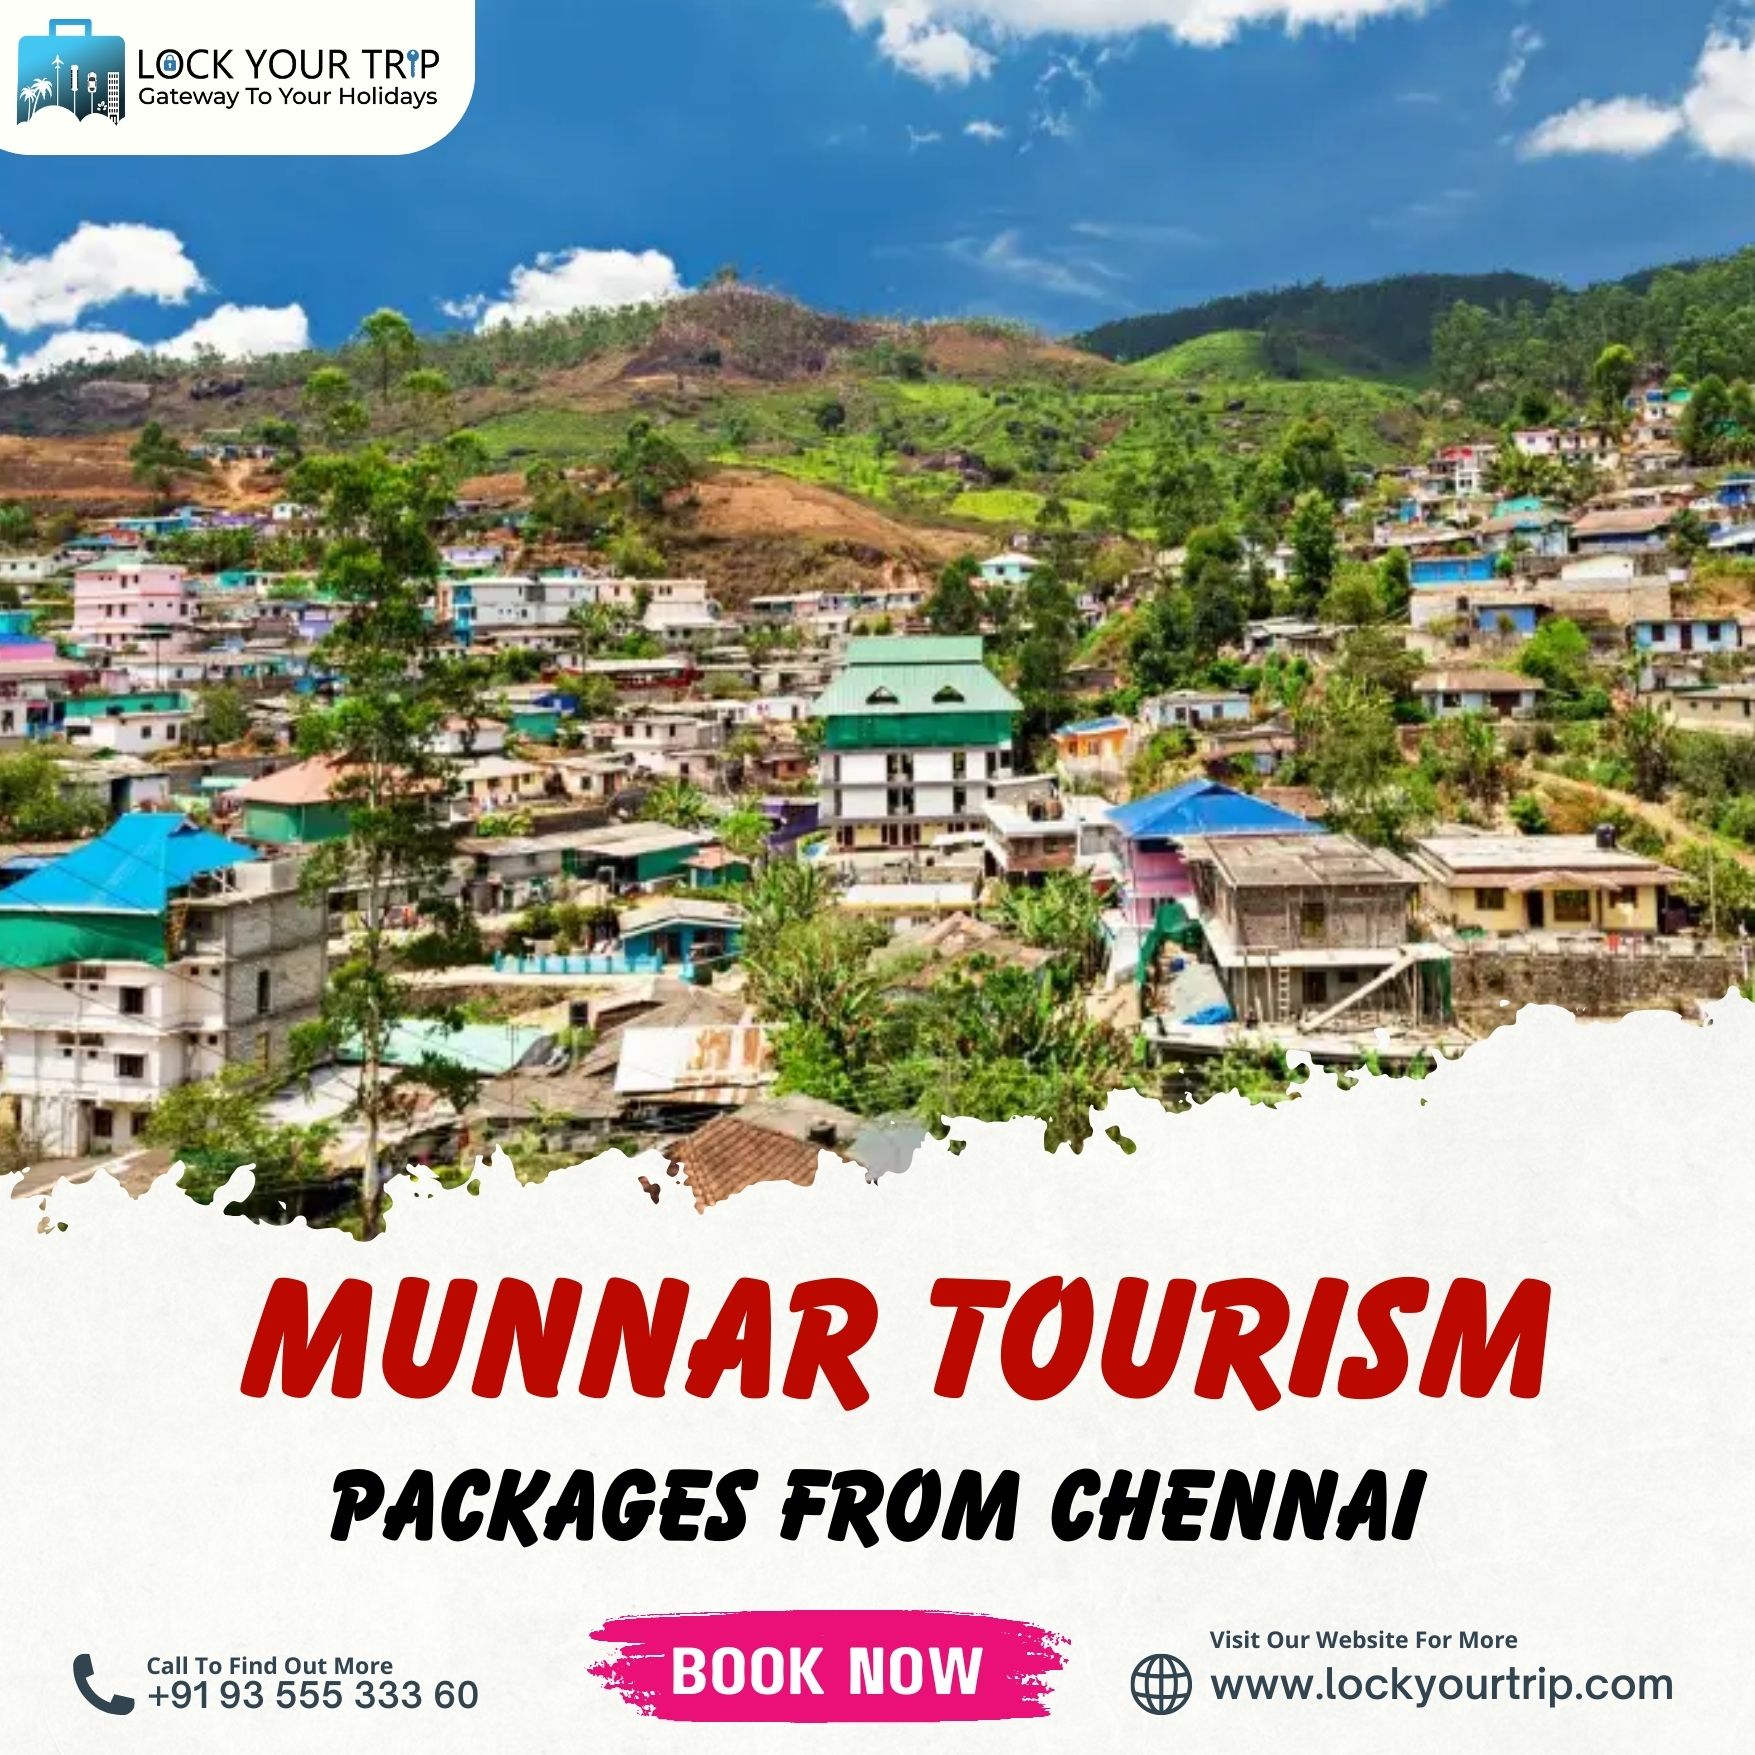 munnar tourism packages from chennai